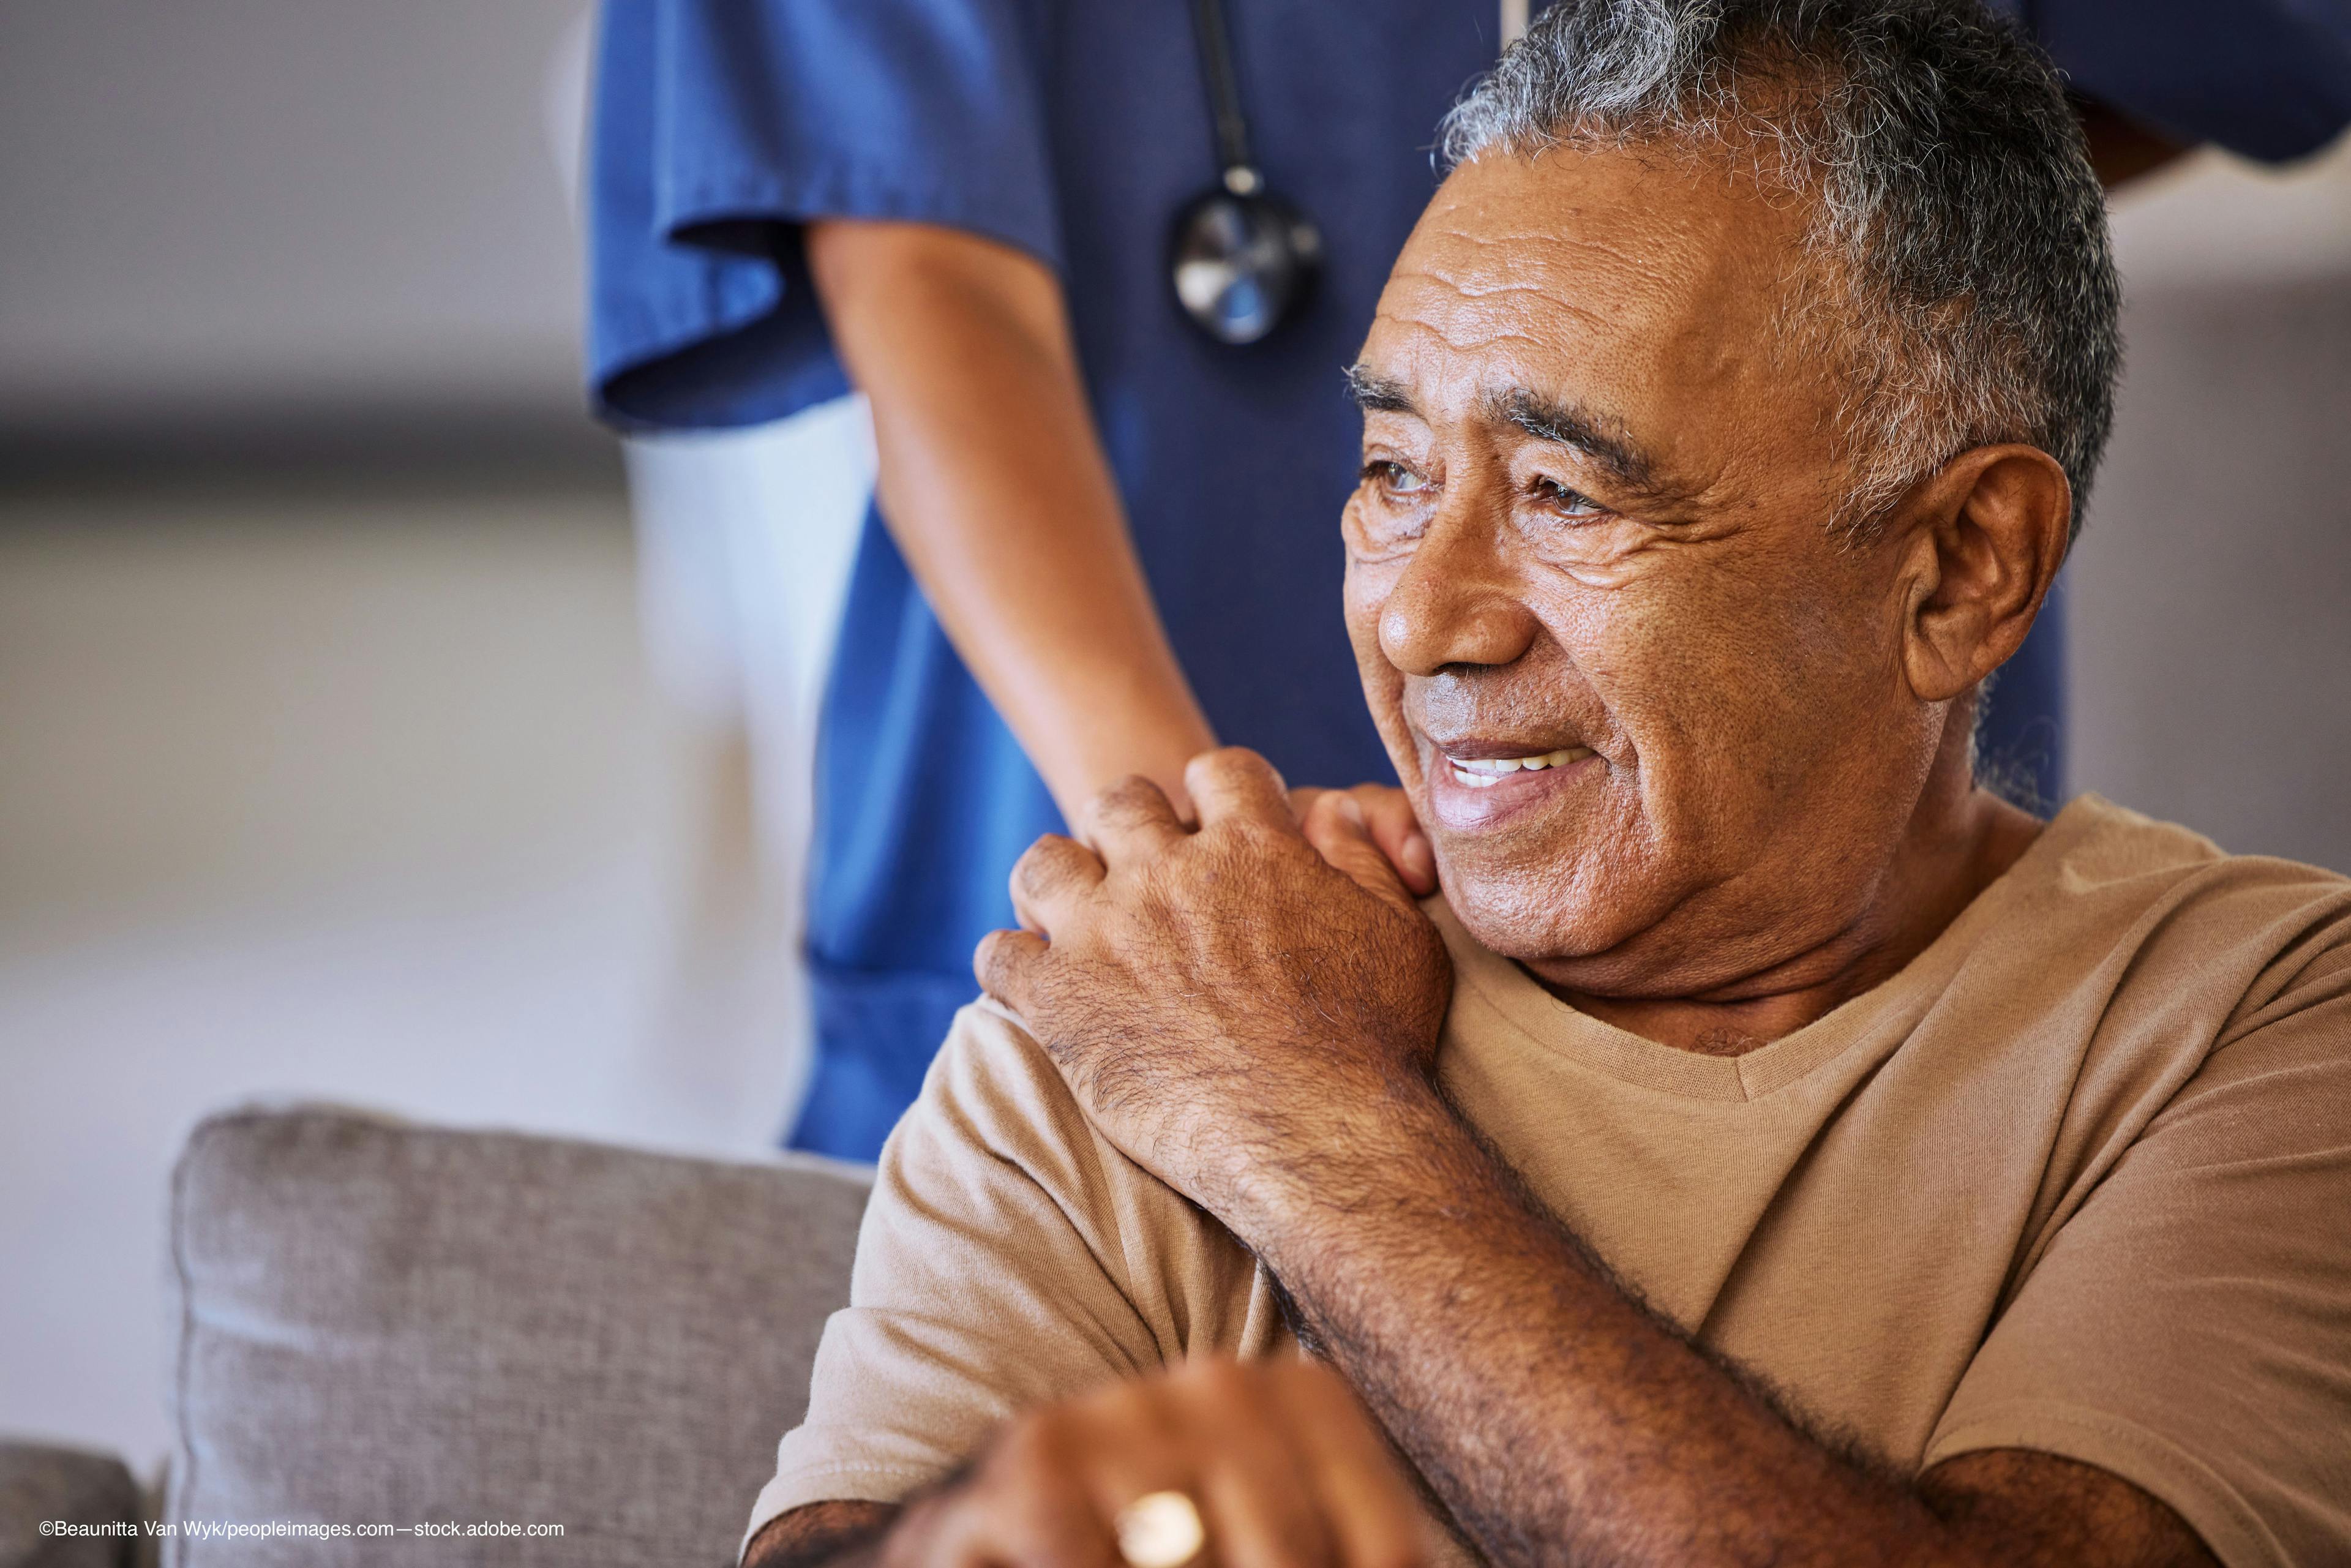 Older man sitting down holding the hand of a physician on his shoulder Image Credit: AdobeStock/BeaunittaVanWyk/peopleimages.com